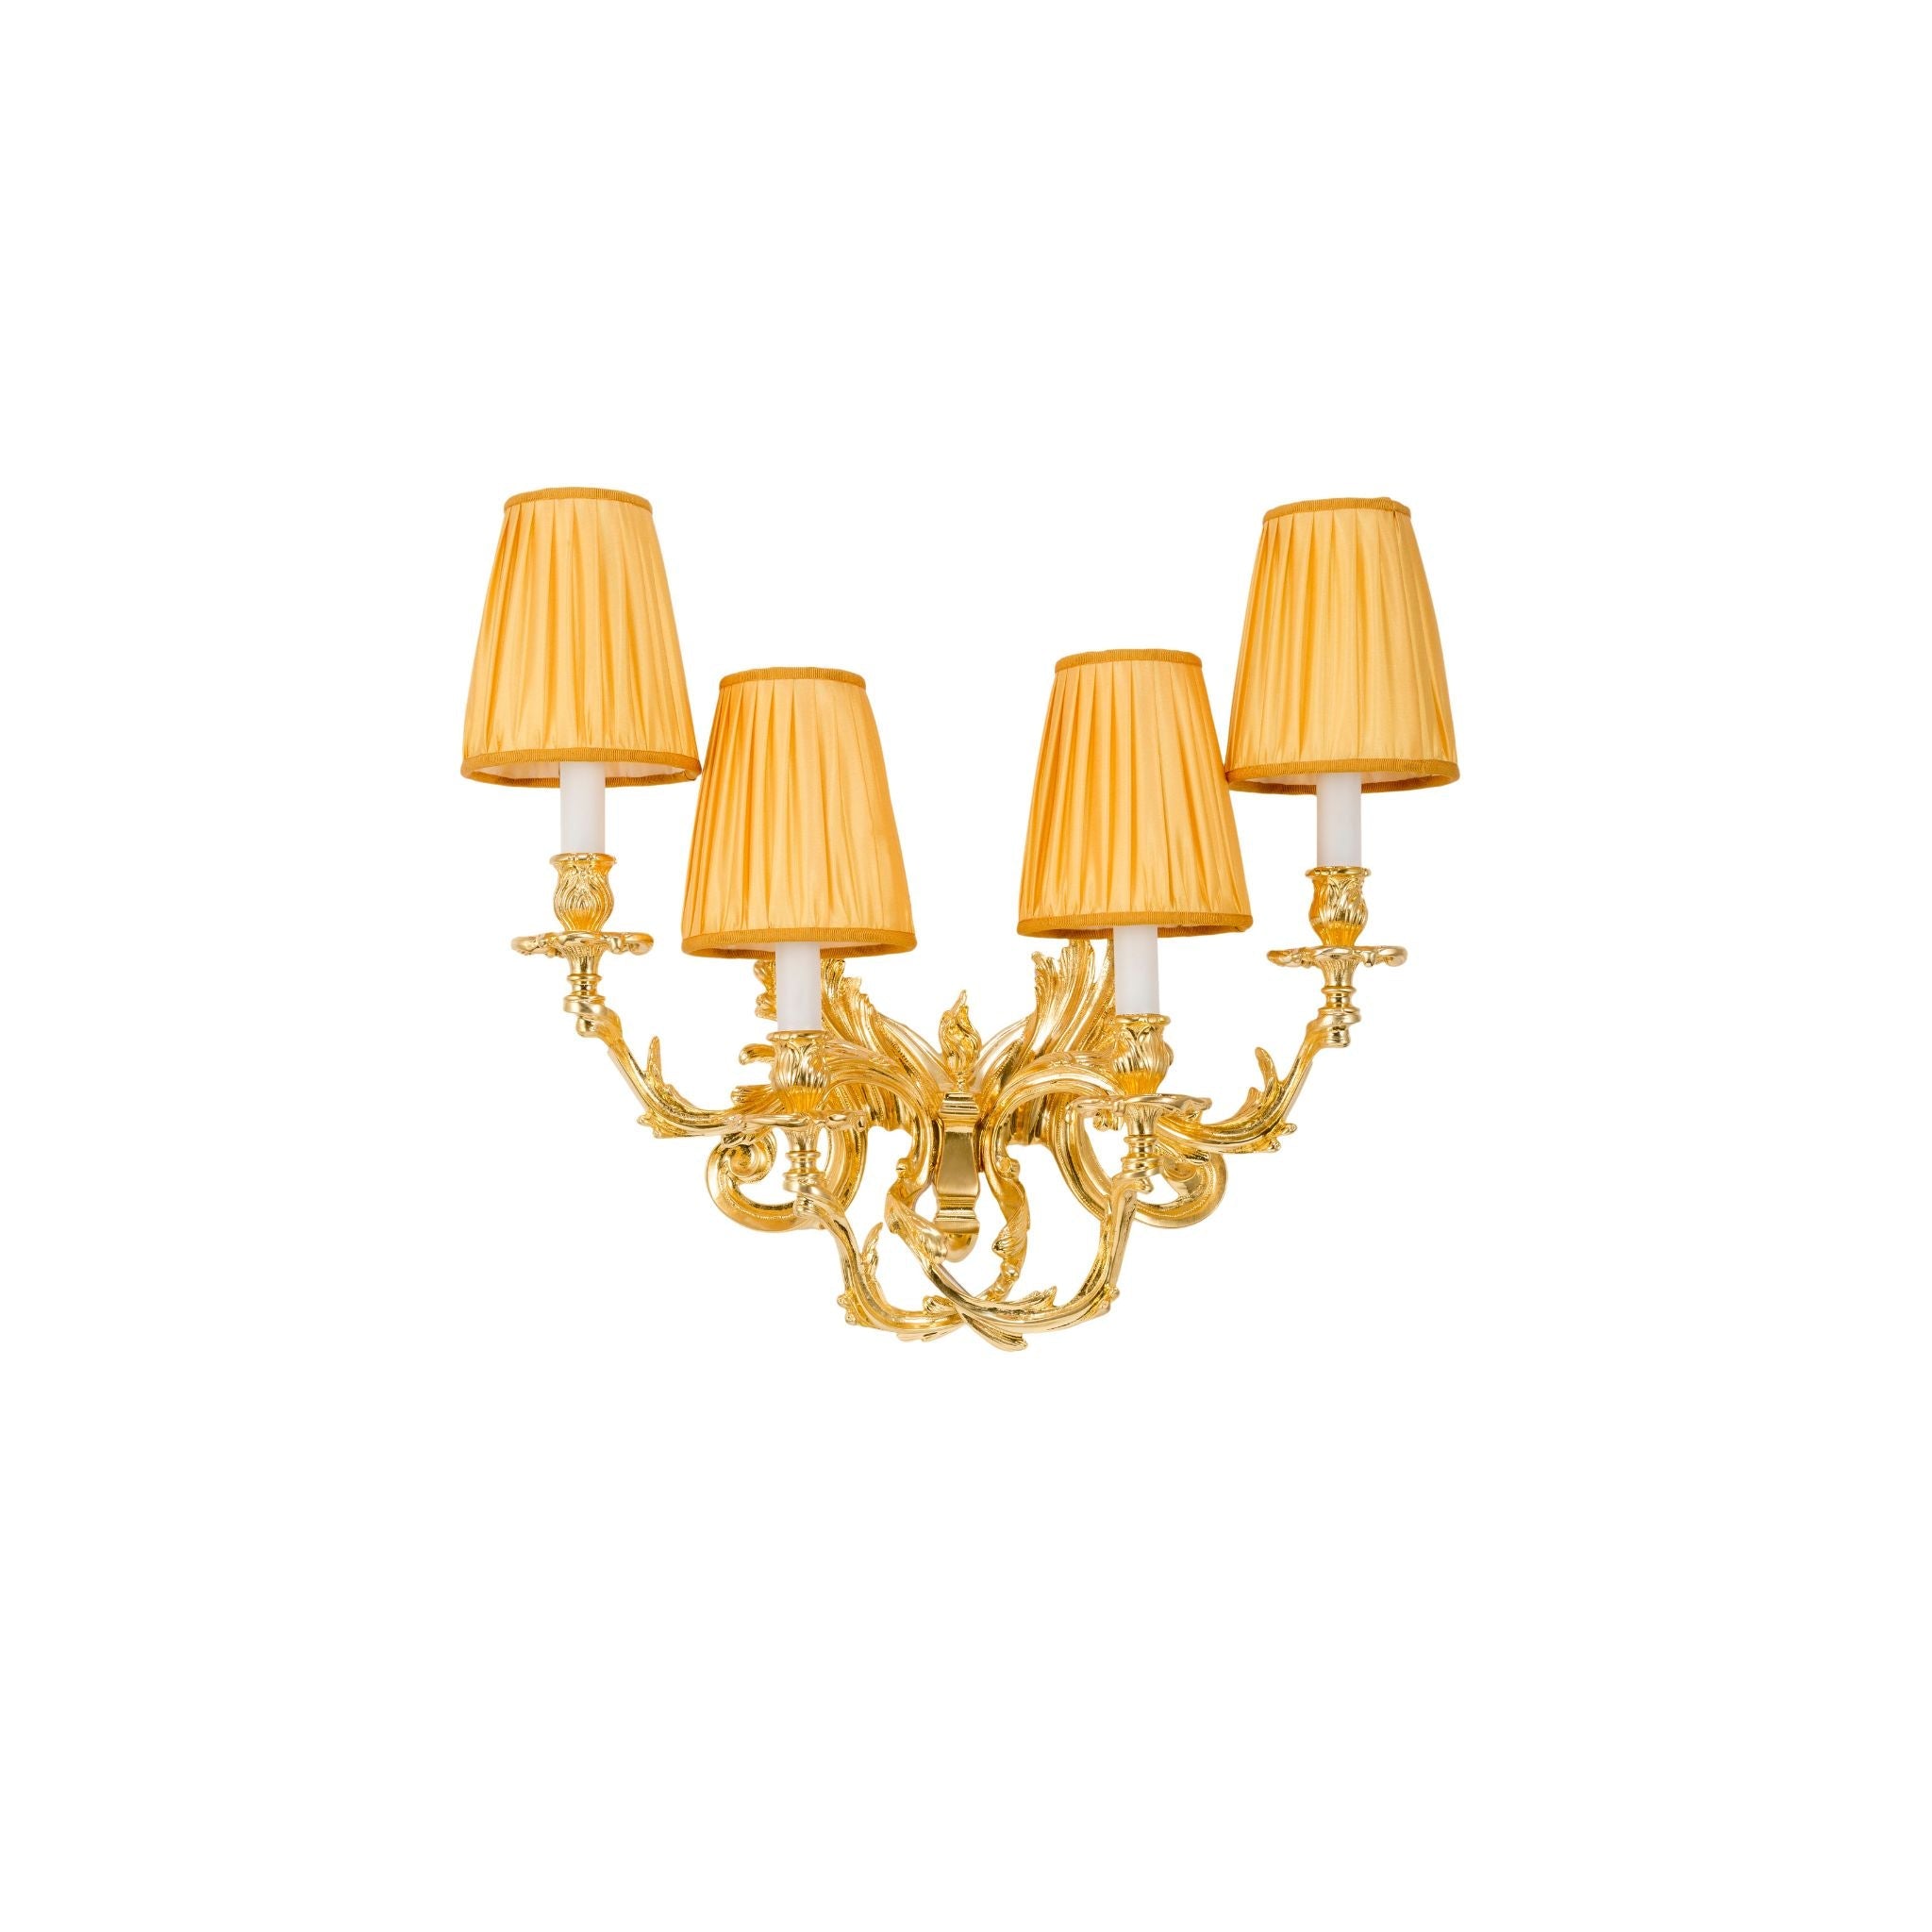 Palmira leaves sconce with four lights - ilbronzetto